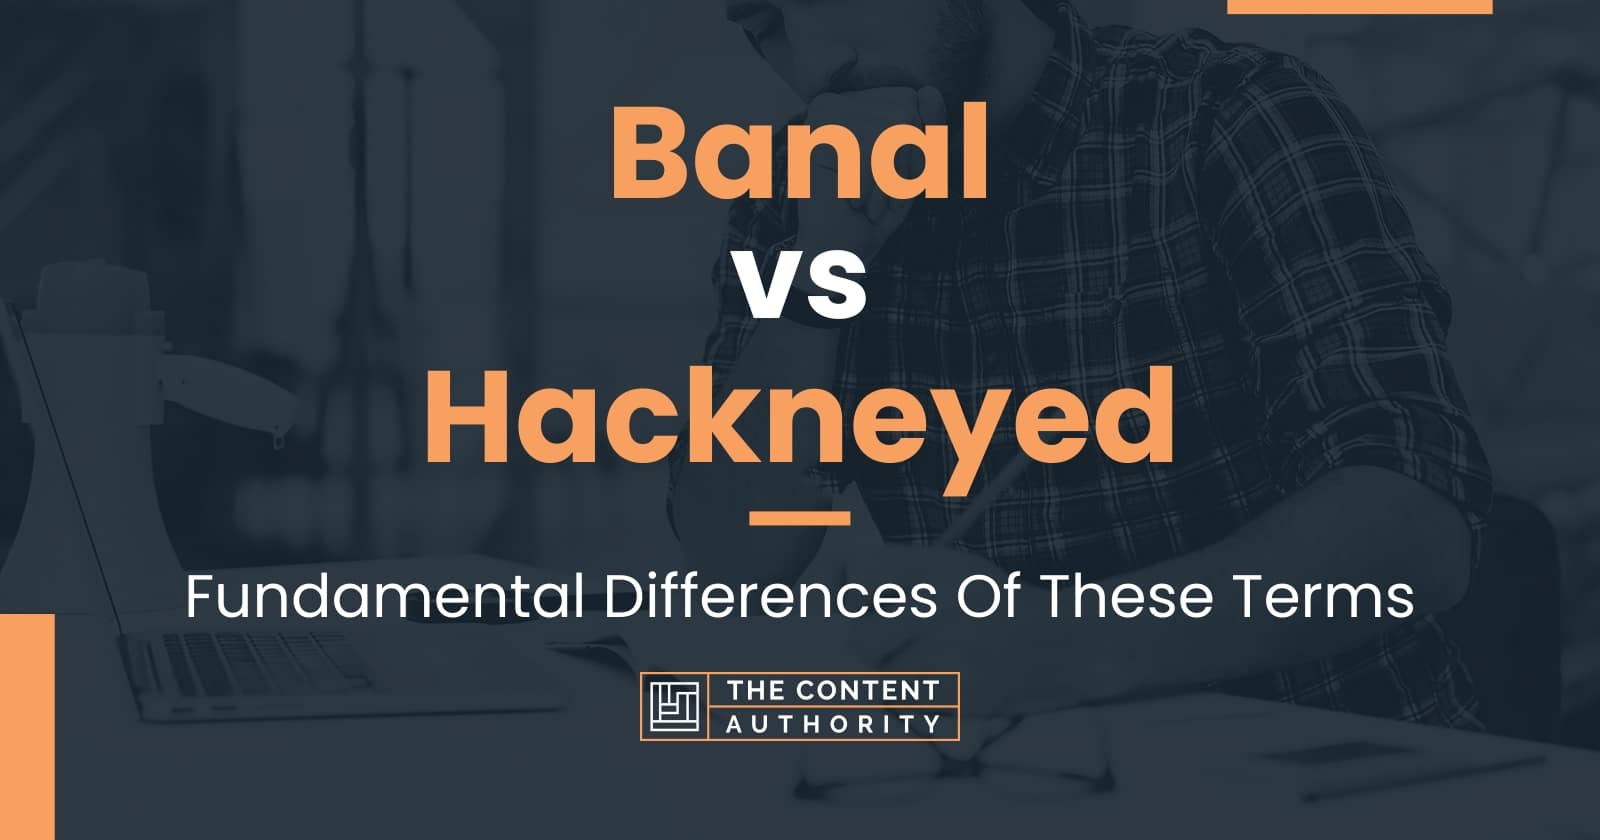 Banal vs Hackneyed: Fundamental Differences Of These Terms